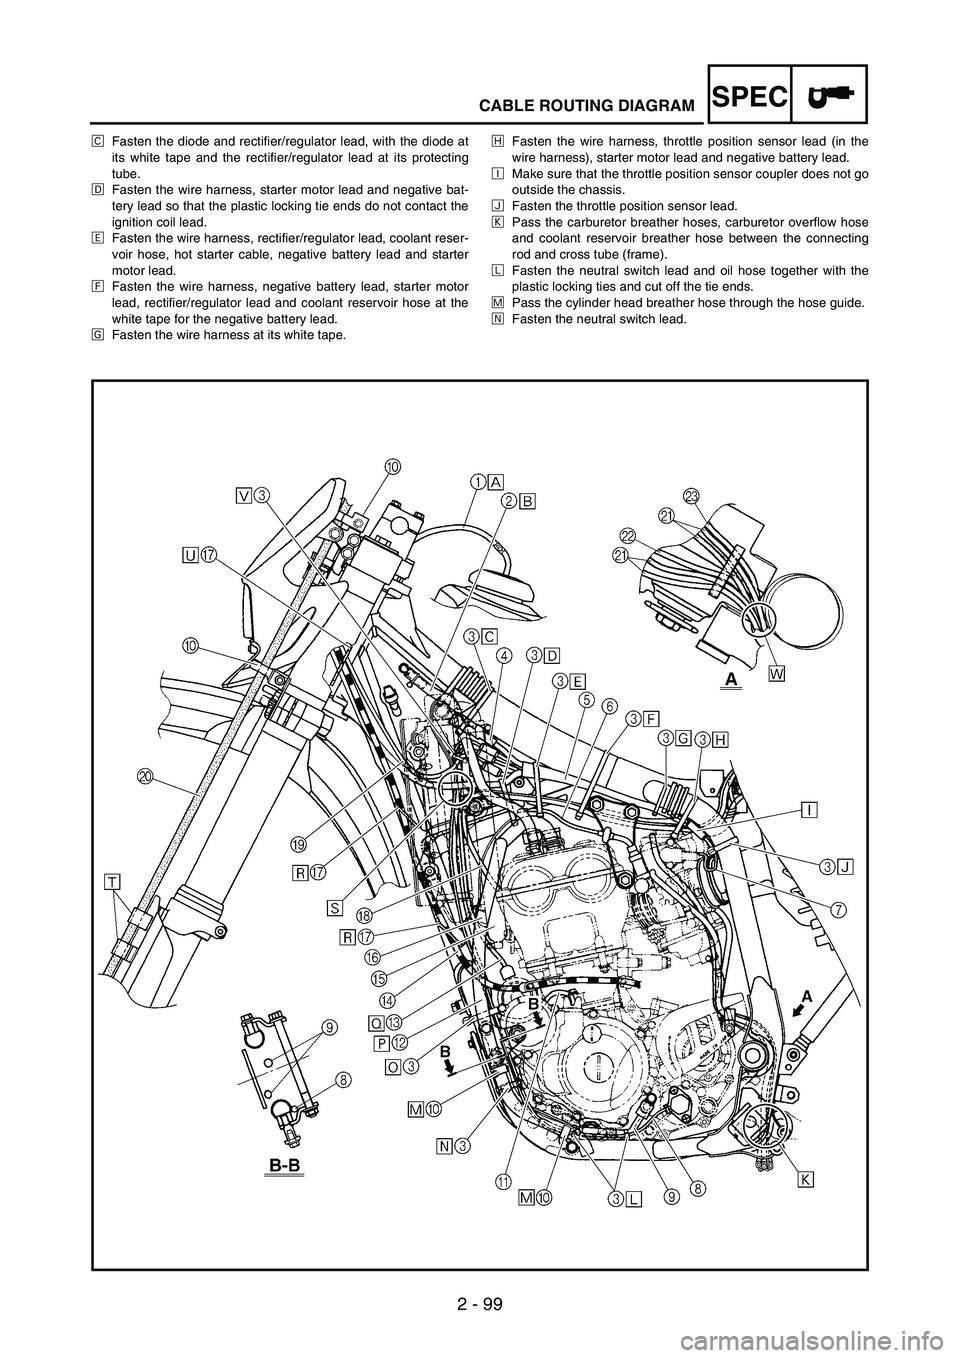 YAMAHA WR 250F 2003  Manuale de Empleo (in Spanish) SPEC
2 - 99
CABLE ROUTING DIAGRAM
ÊFasten the diode and rectifier/regulator lead, with the diode at
its white tape and the rectifier/regulator lead at its protecting
tube.
ËFasten the wire harness, 